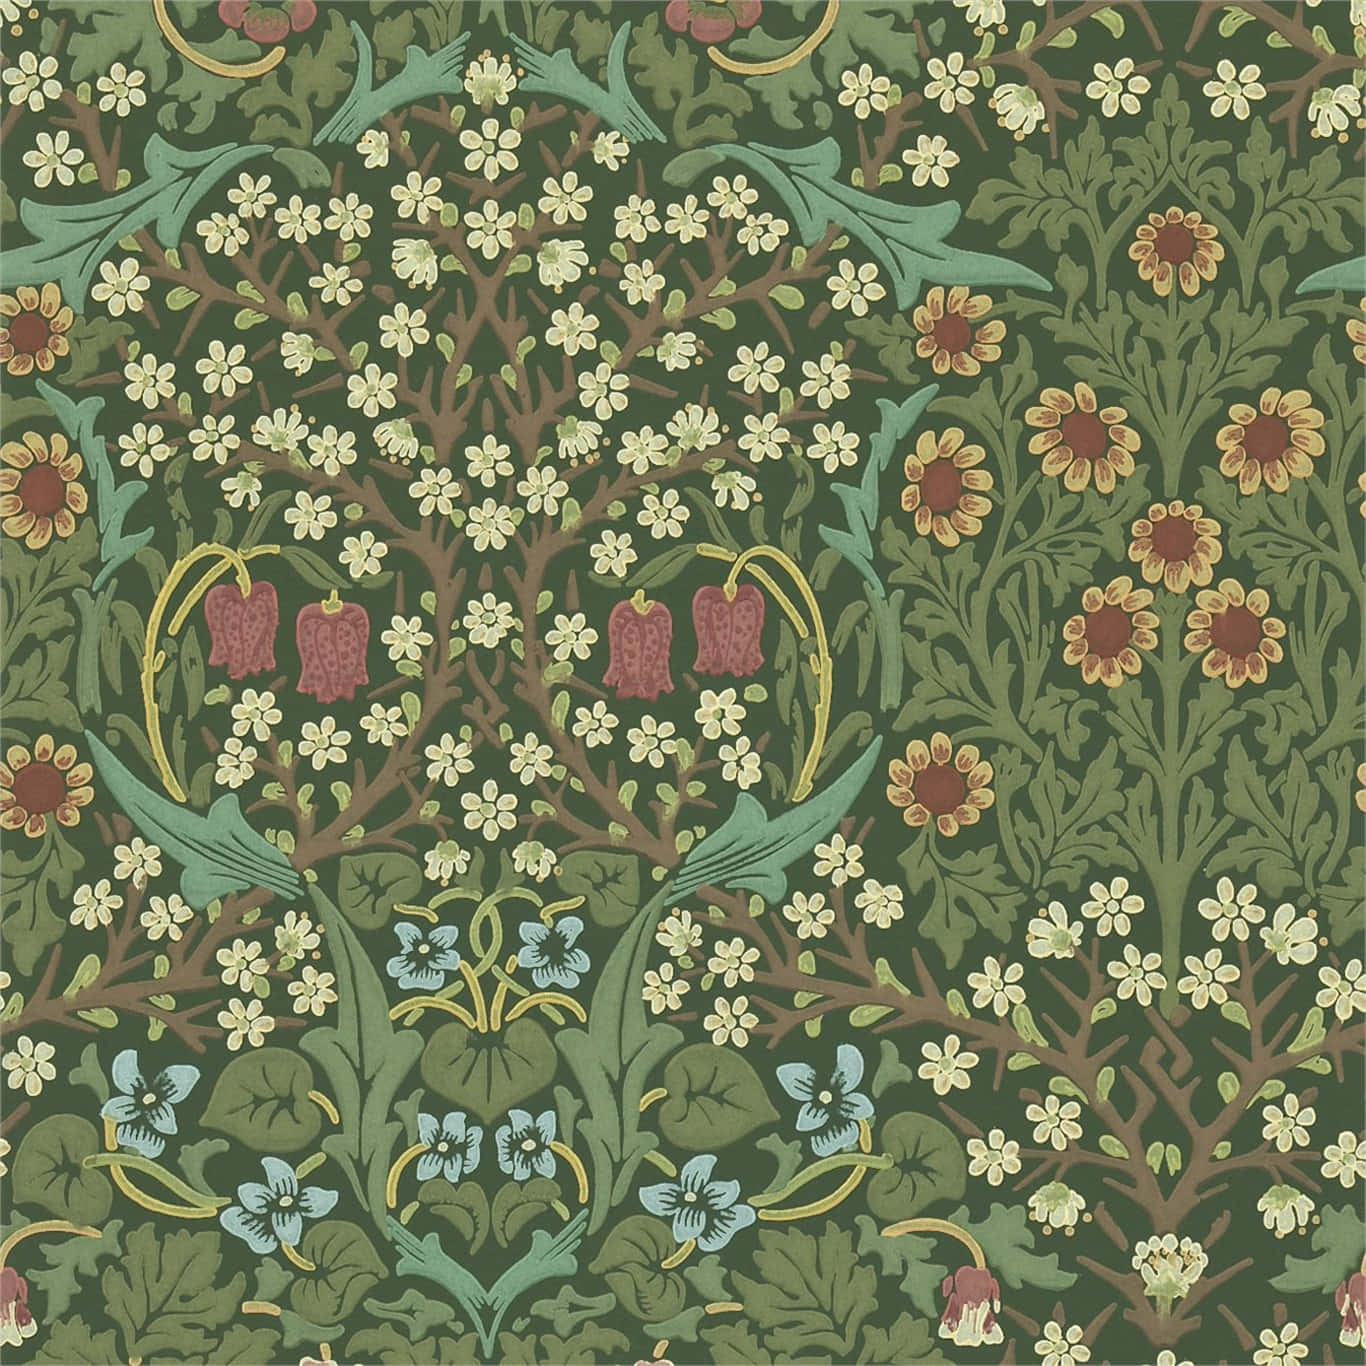 A Wallpaper With Flowers And Leaves Wallpaper